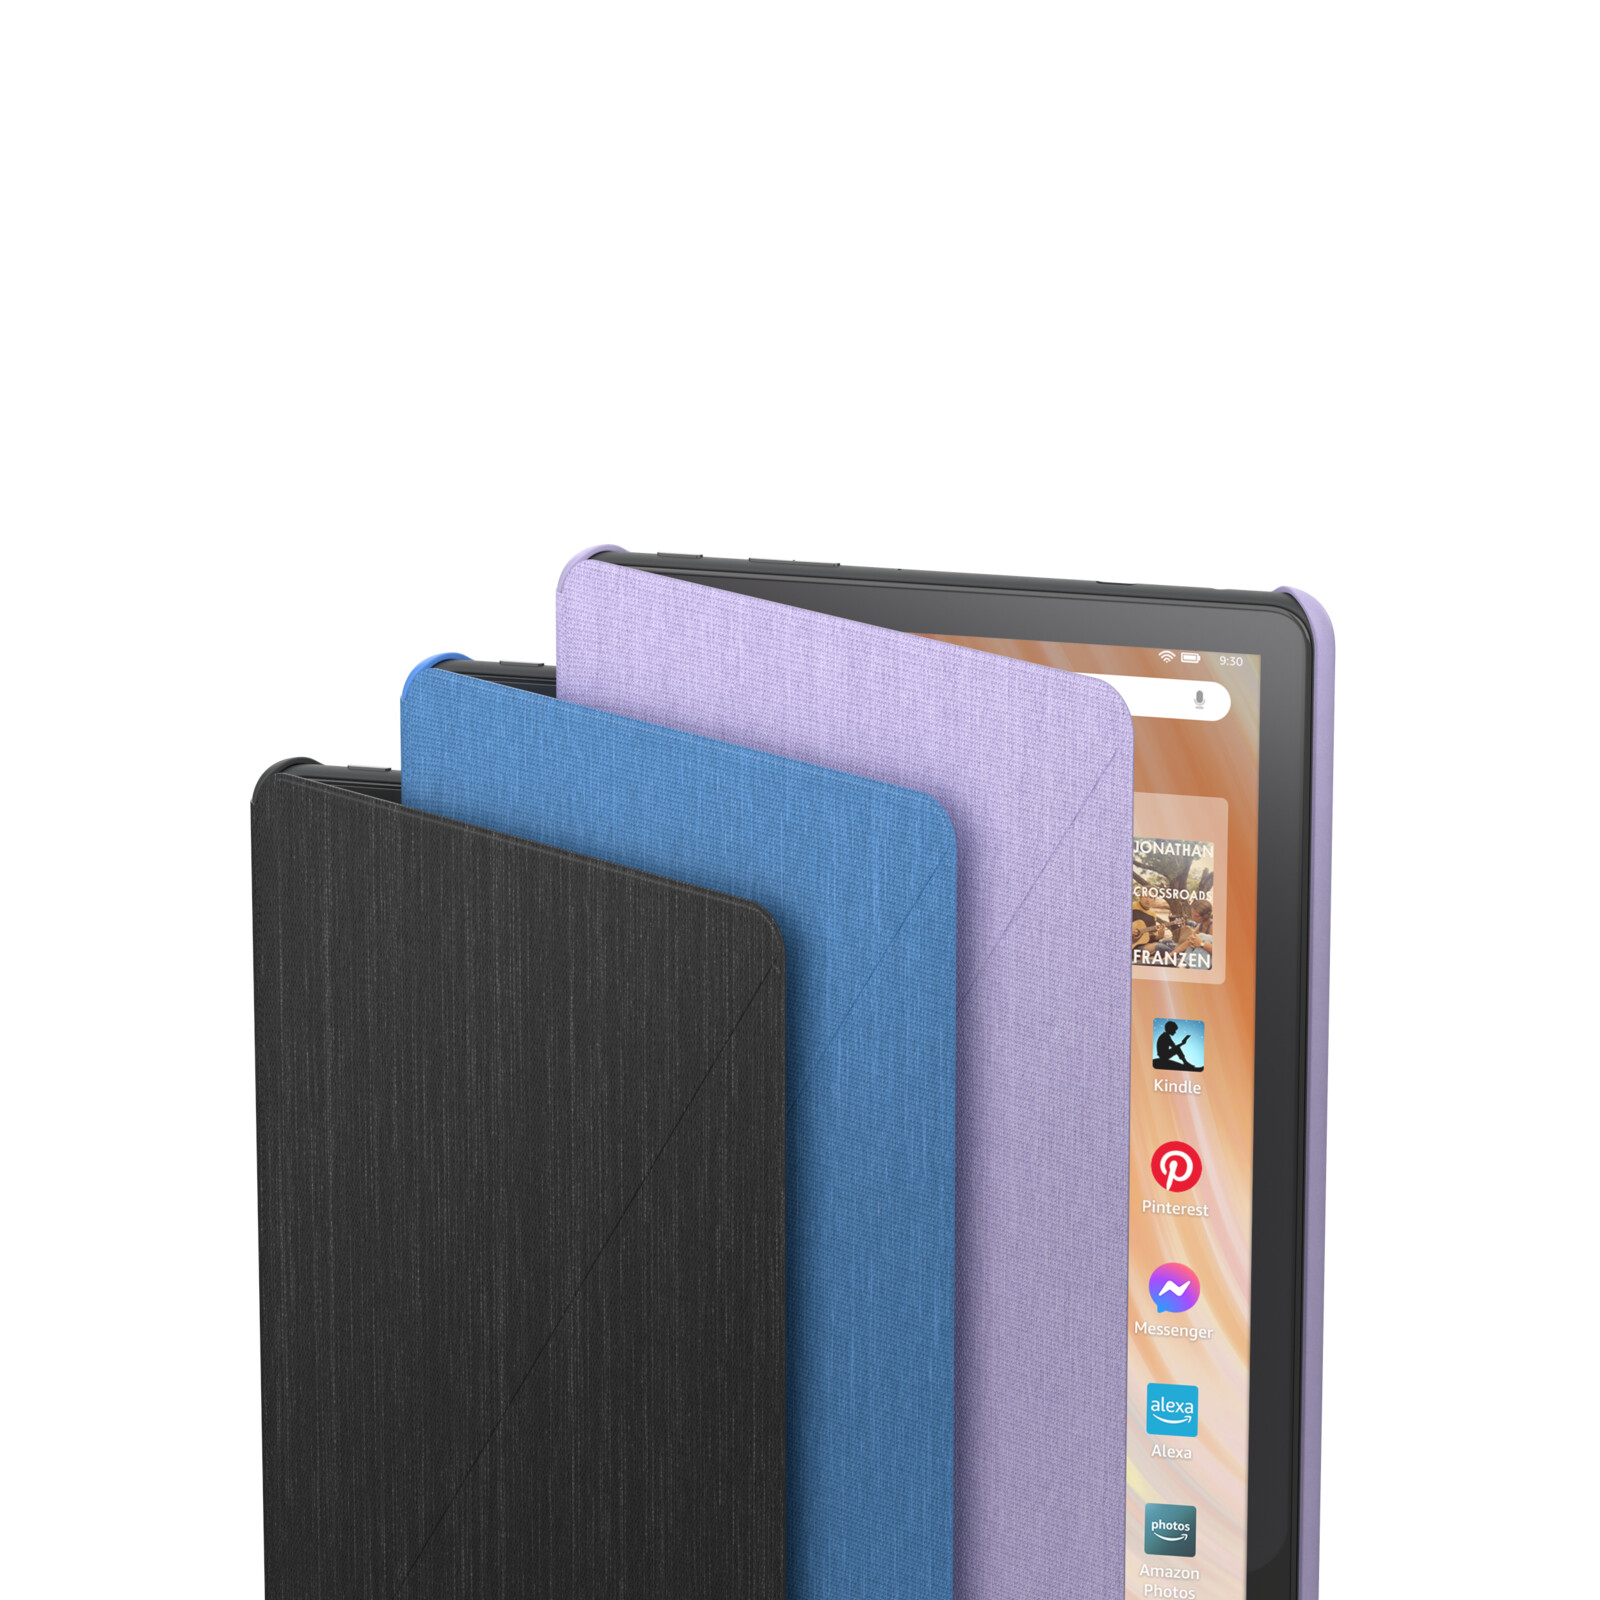 Amazon Fire HD 10 with Cover